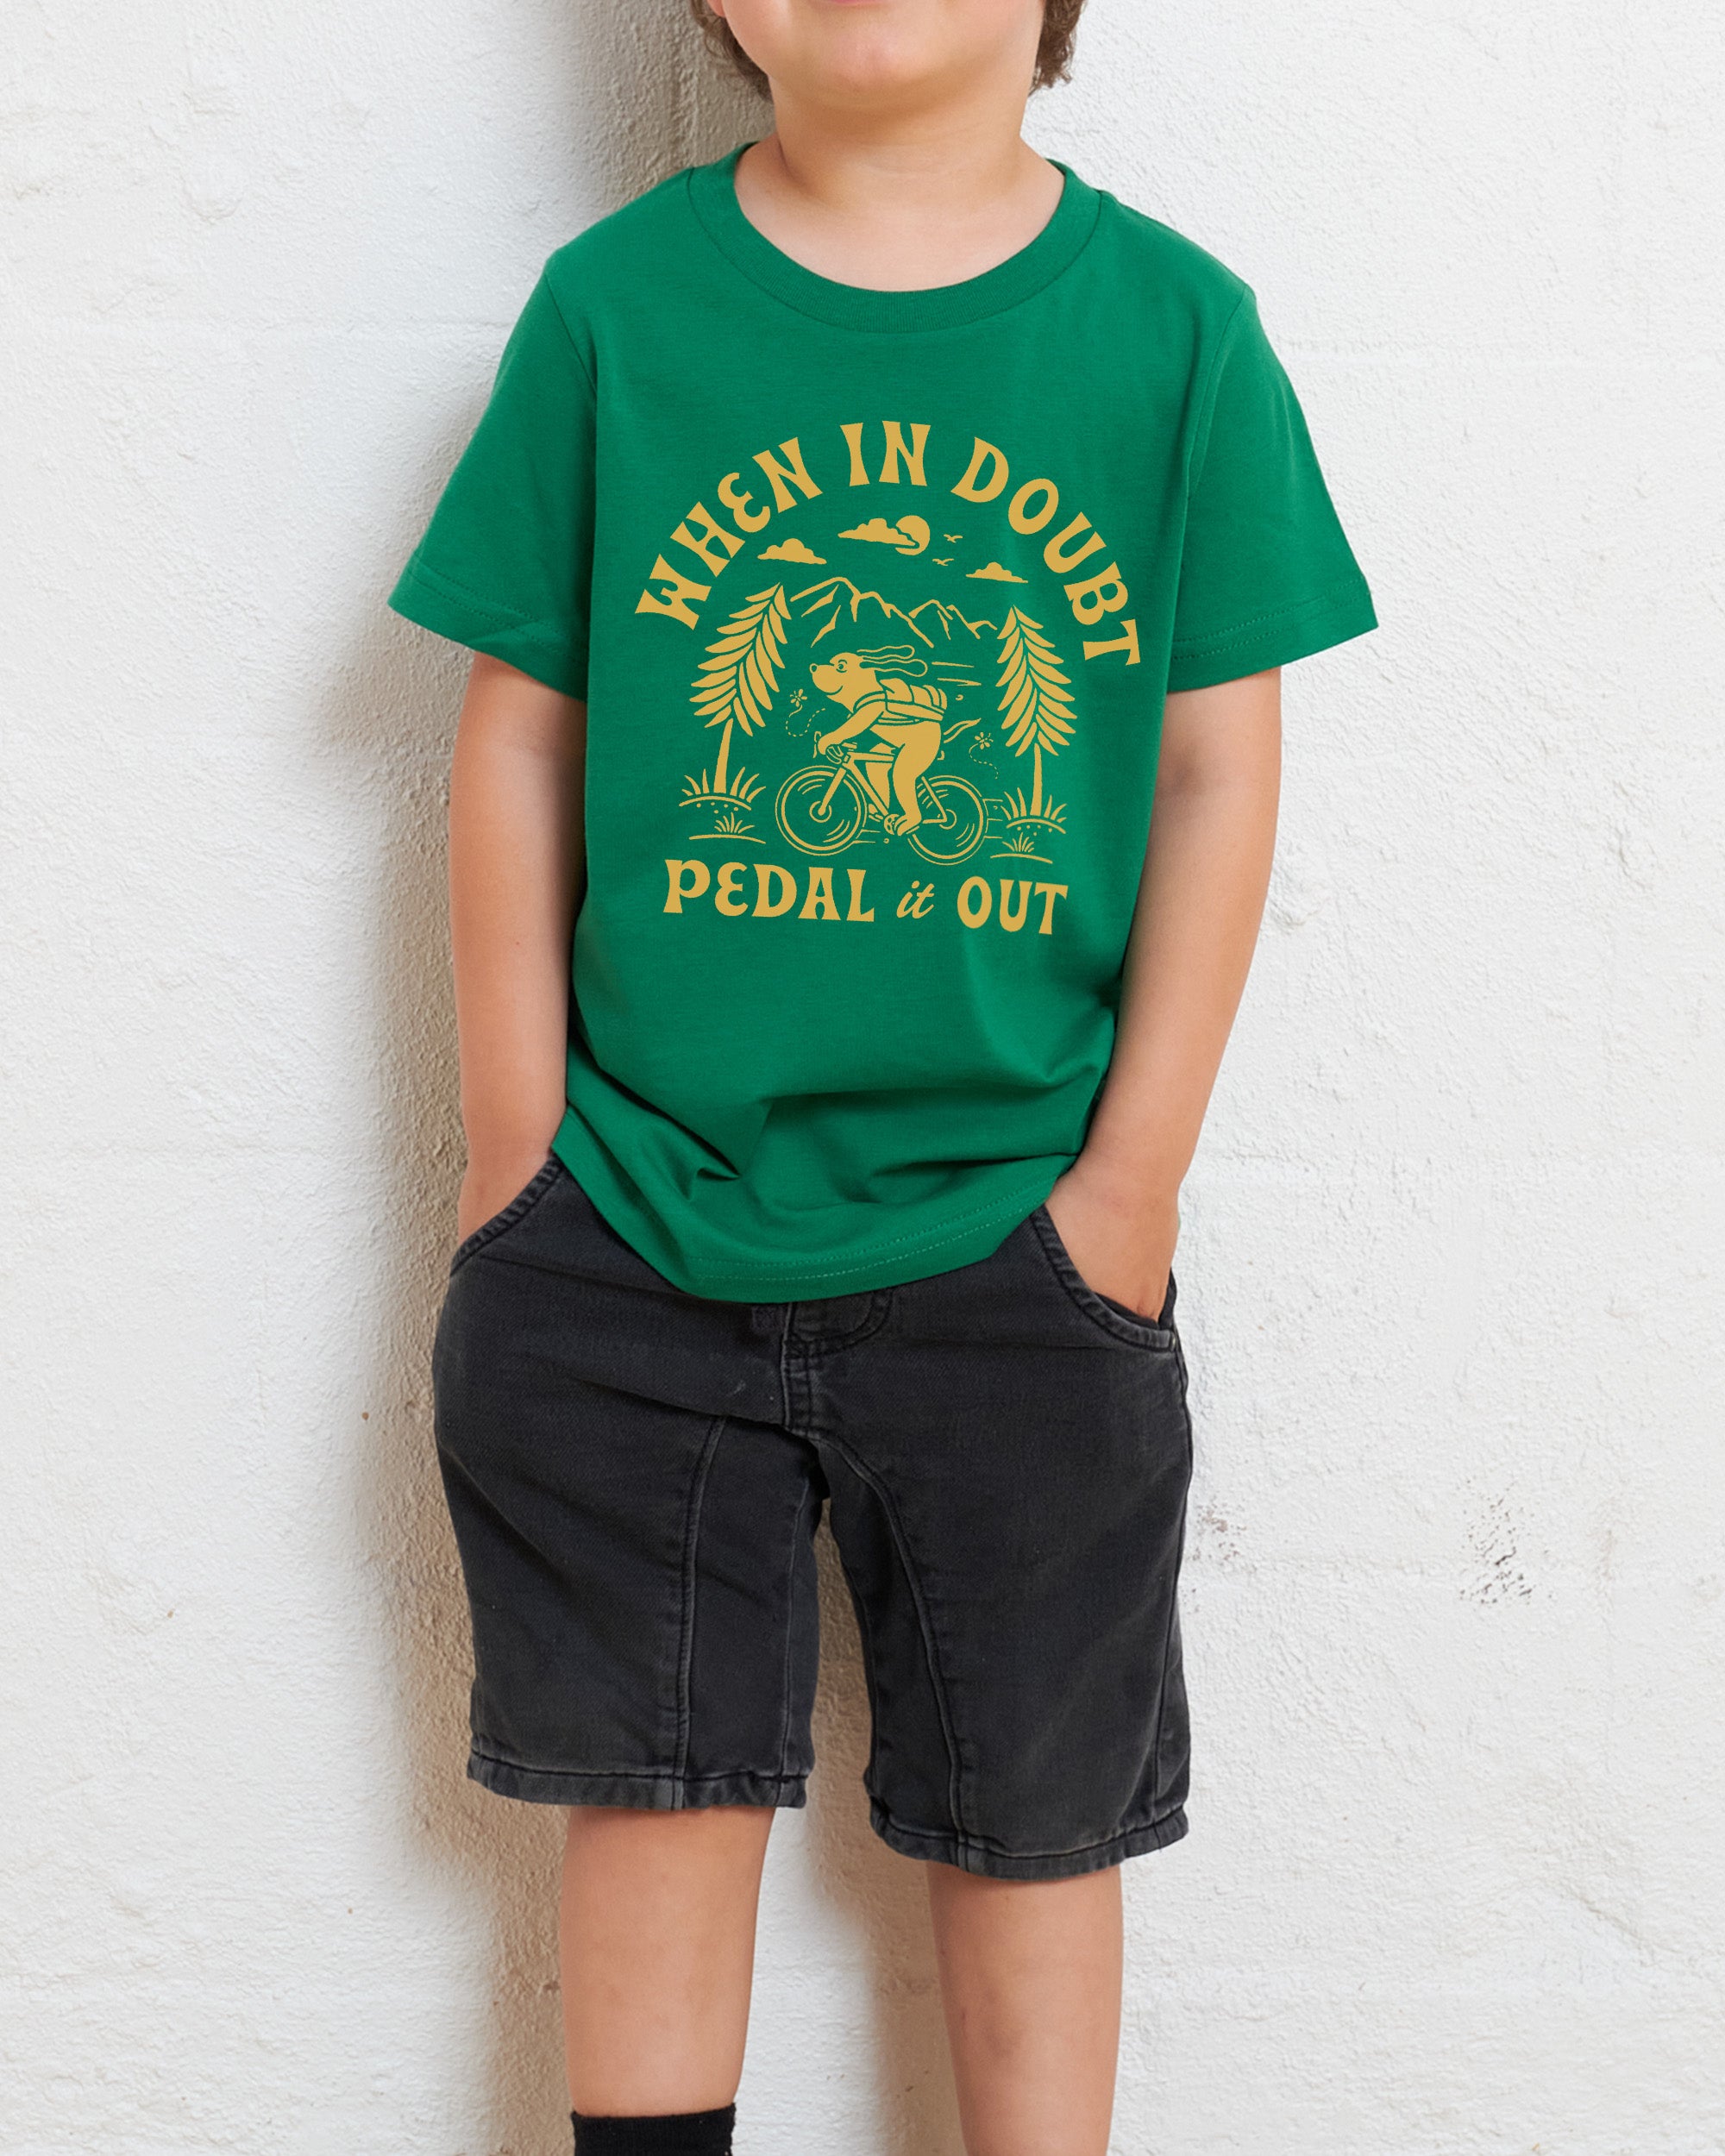 When In Doubt Pedal It Out Kids T-Shirt